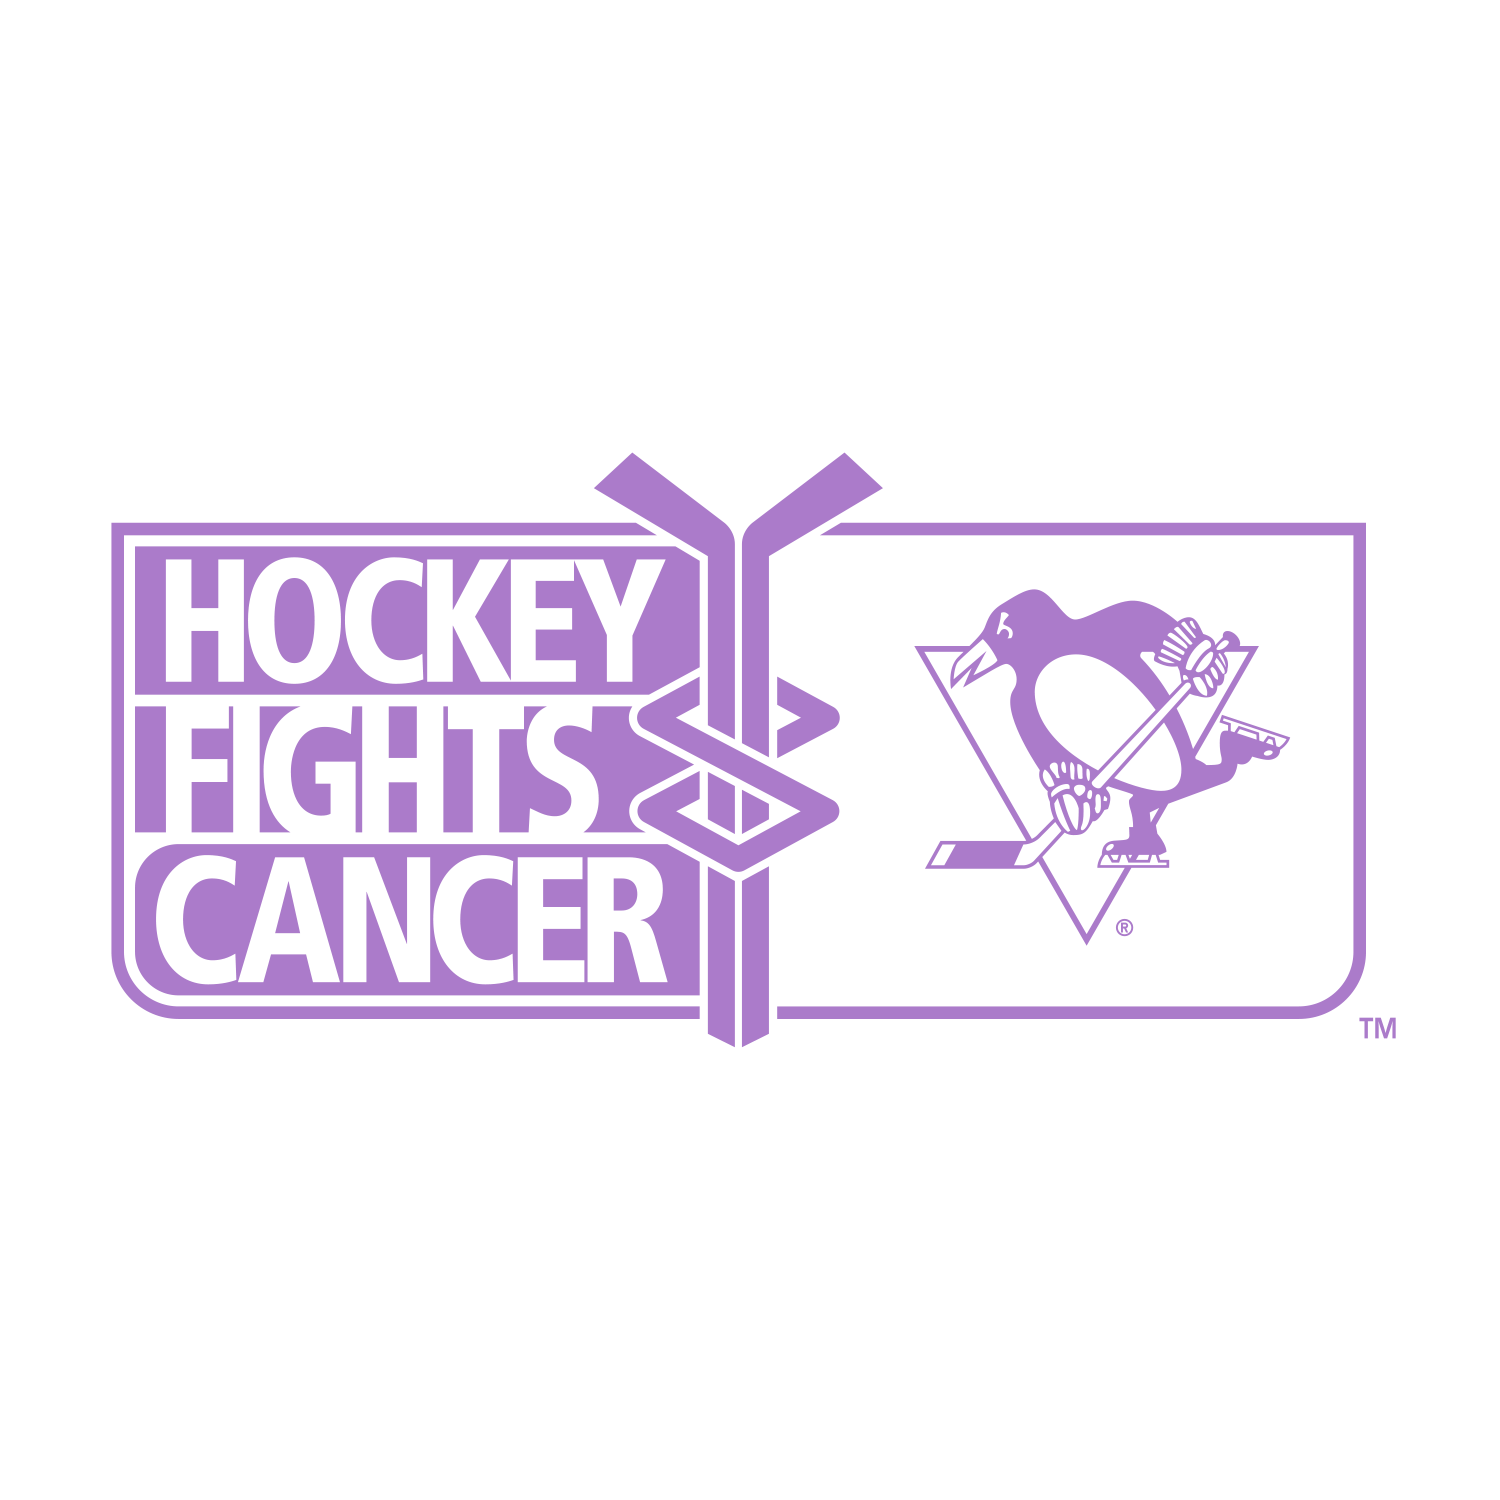 Pittsburgh Penguins auf X: „#HockeyFightsCancer Support the cause